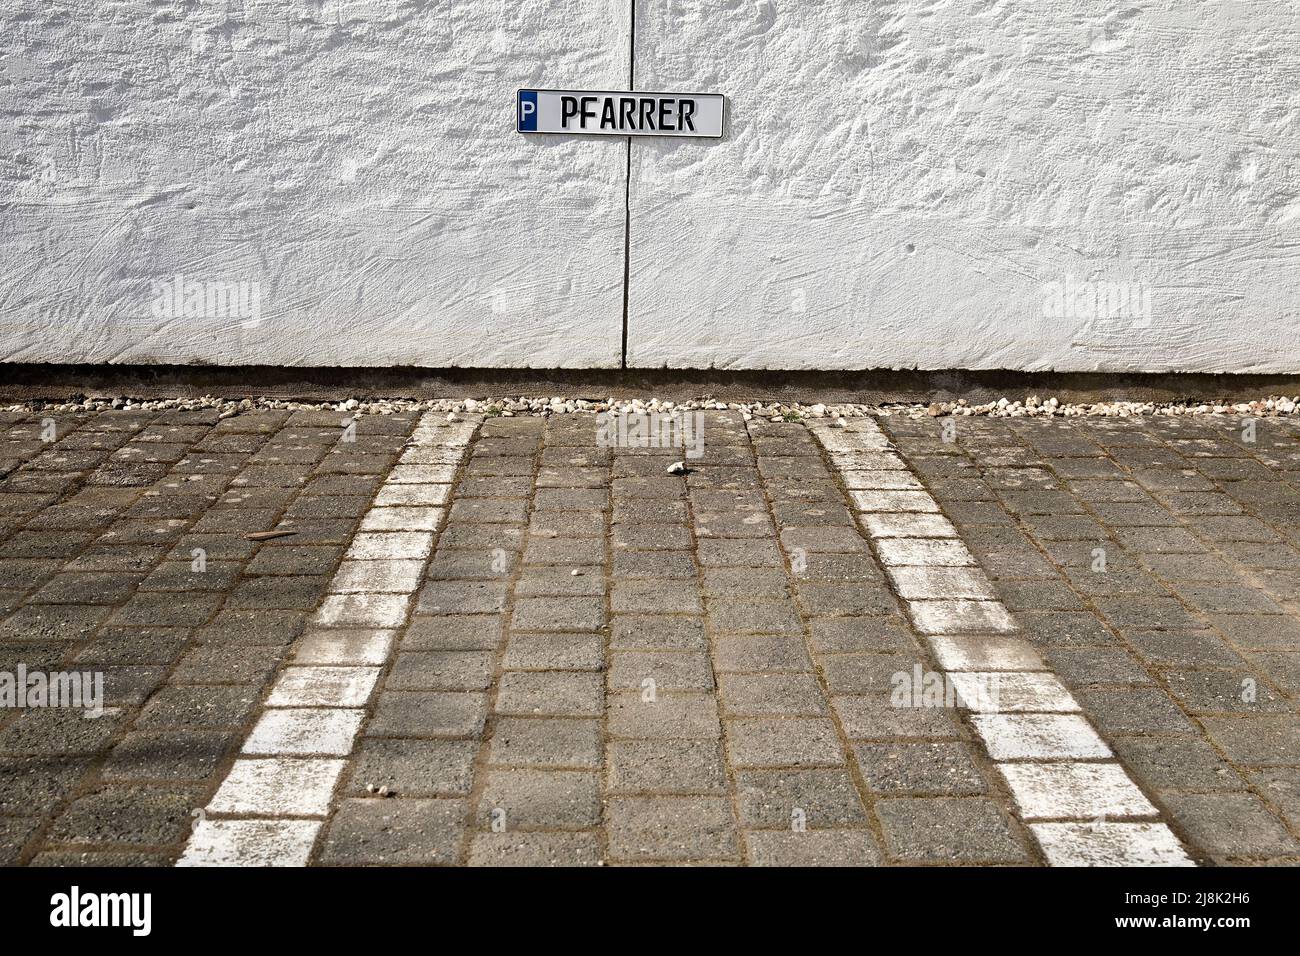 Empty parking place for clericalist, symbol picture for shortage of priests in the parish, Germany, North Rhine-Westphalia, Bergisches Land, Odenthal Stock Photo